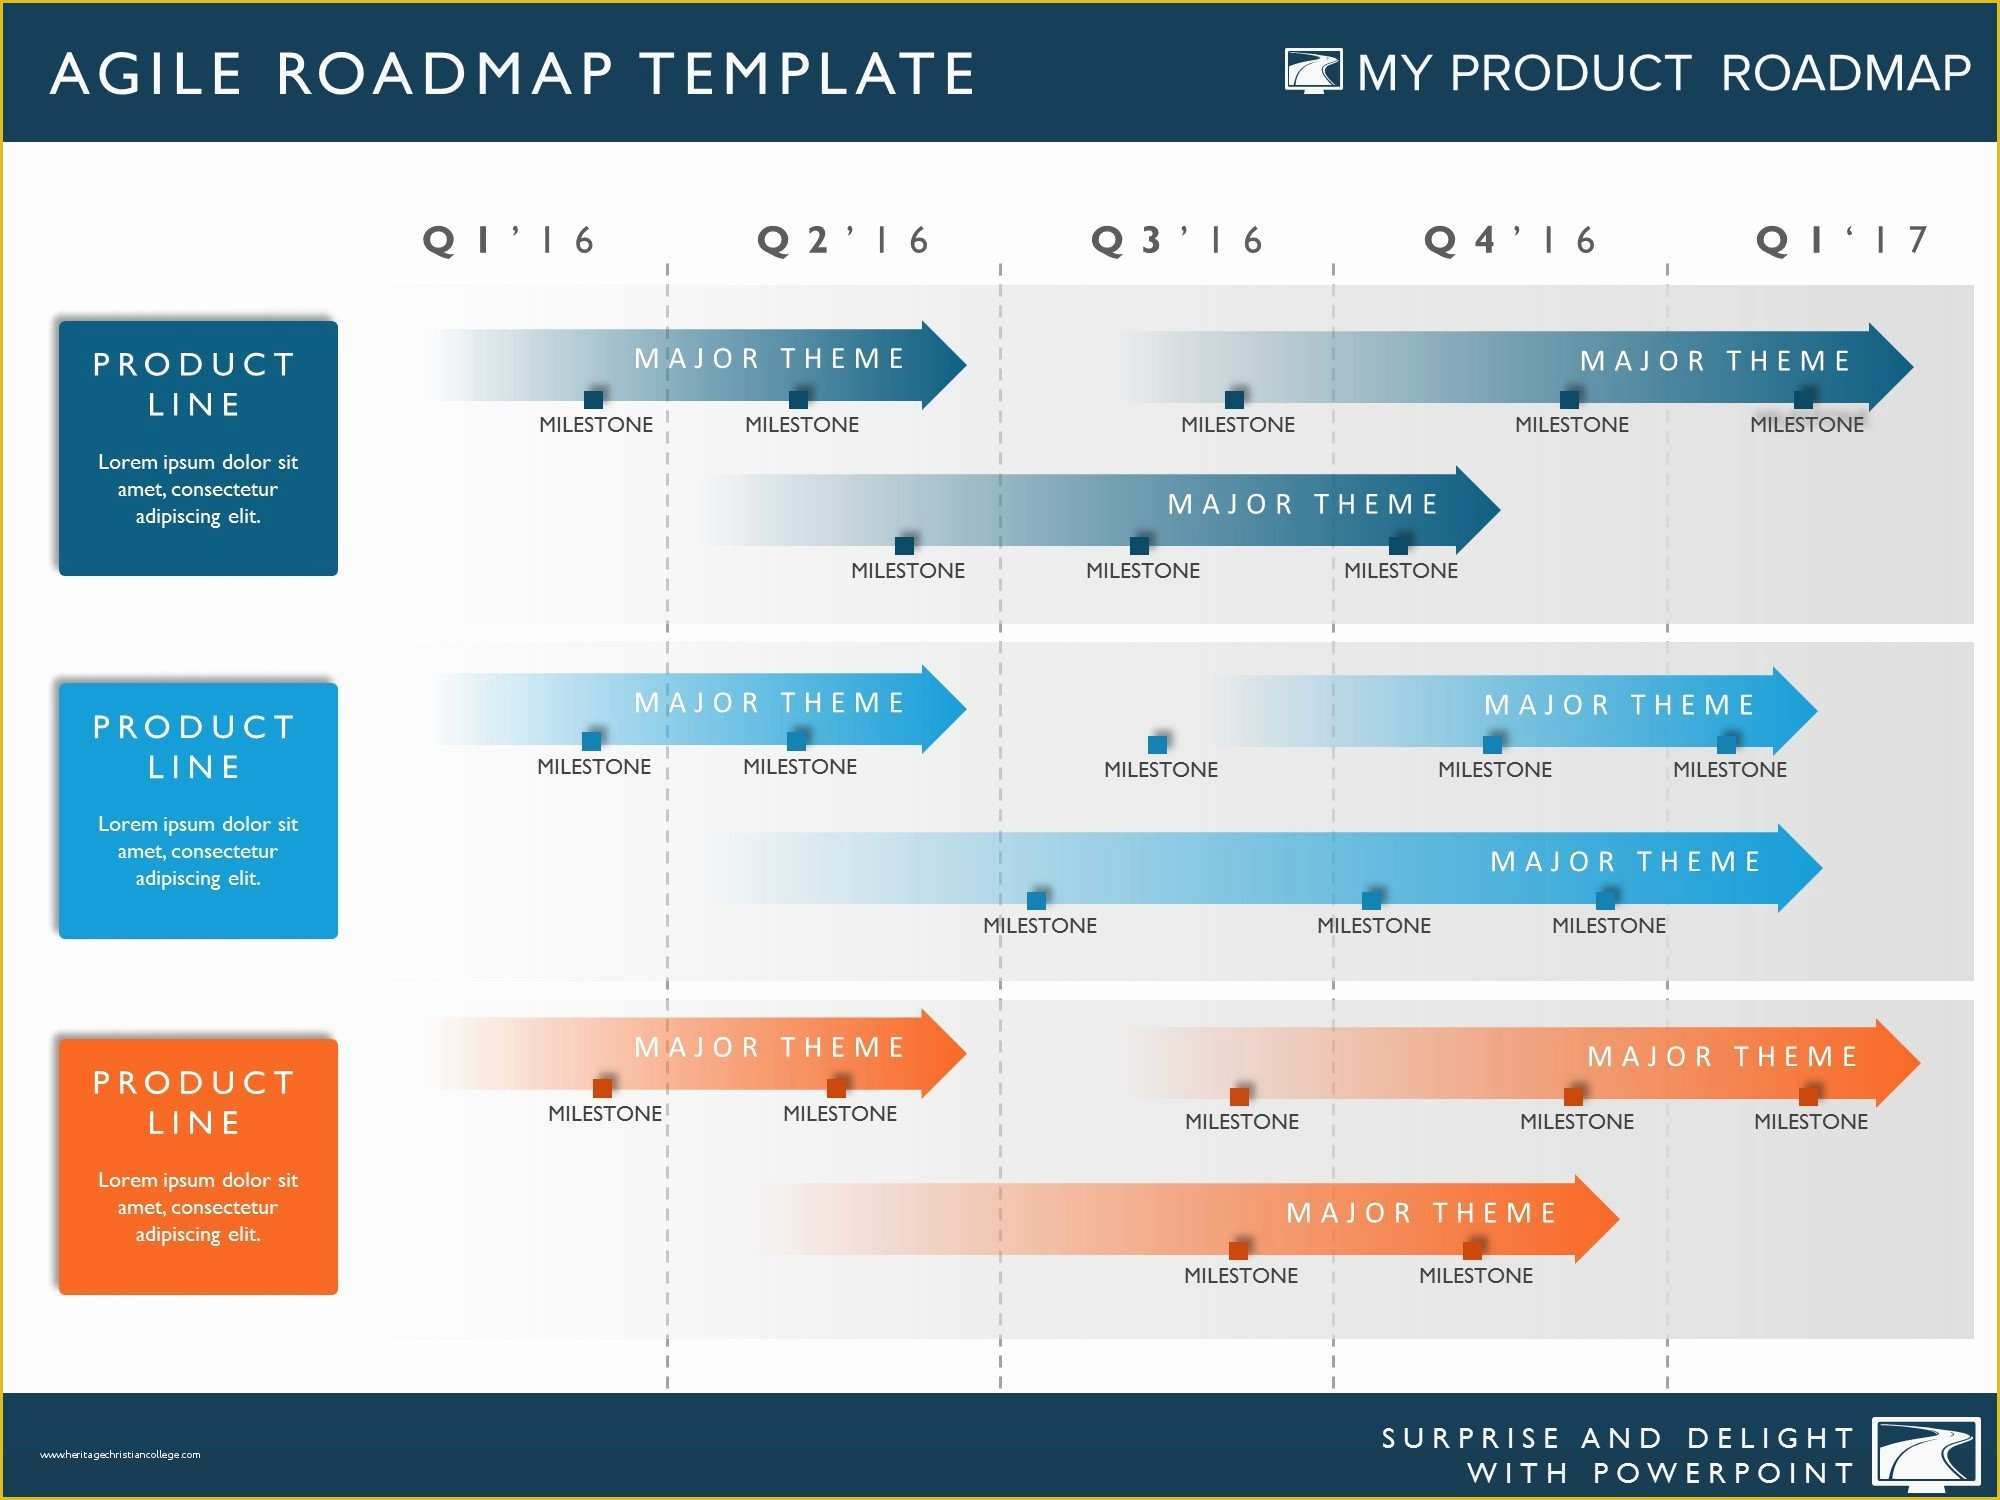 Free Marketing Roadmap Template Of Five Phase Agile software Planning Timeline Roadmap